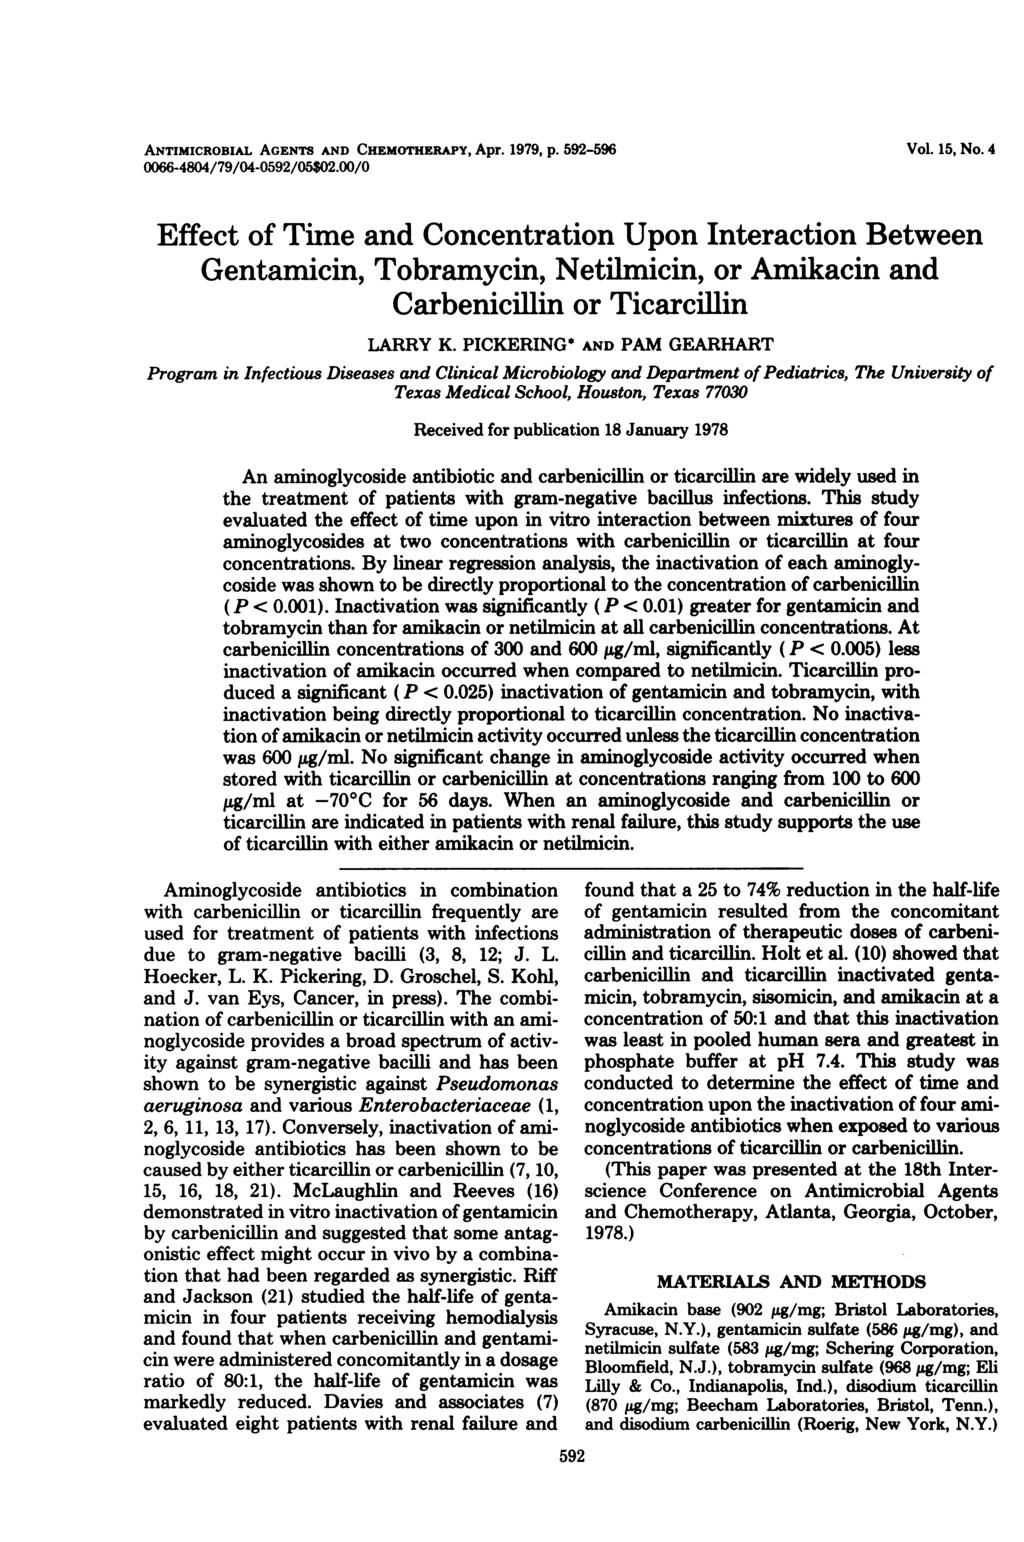 ANTIMICROBIAL AGENTS AND CHEMOTHERAPY, Apr. 1979, p. 592-596 66-484/79/4-592/5$2./ Vol. 15, No.